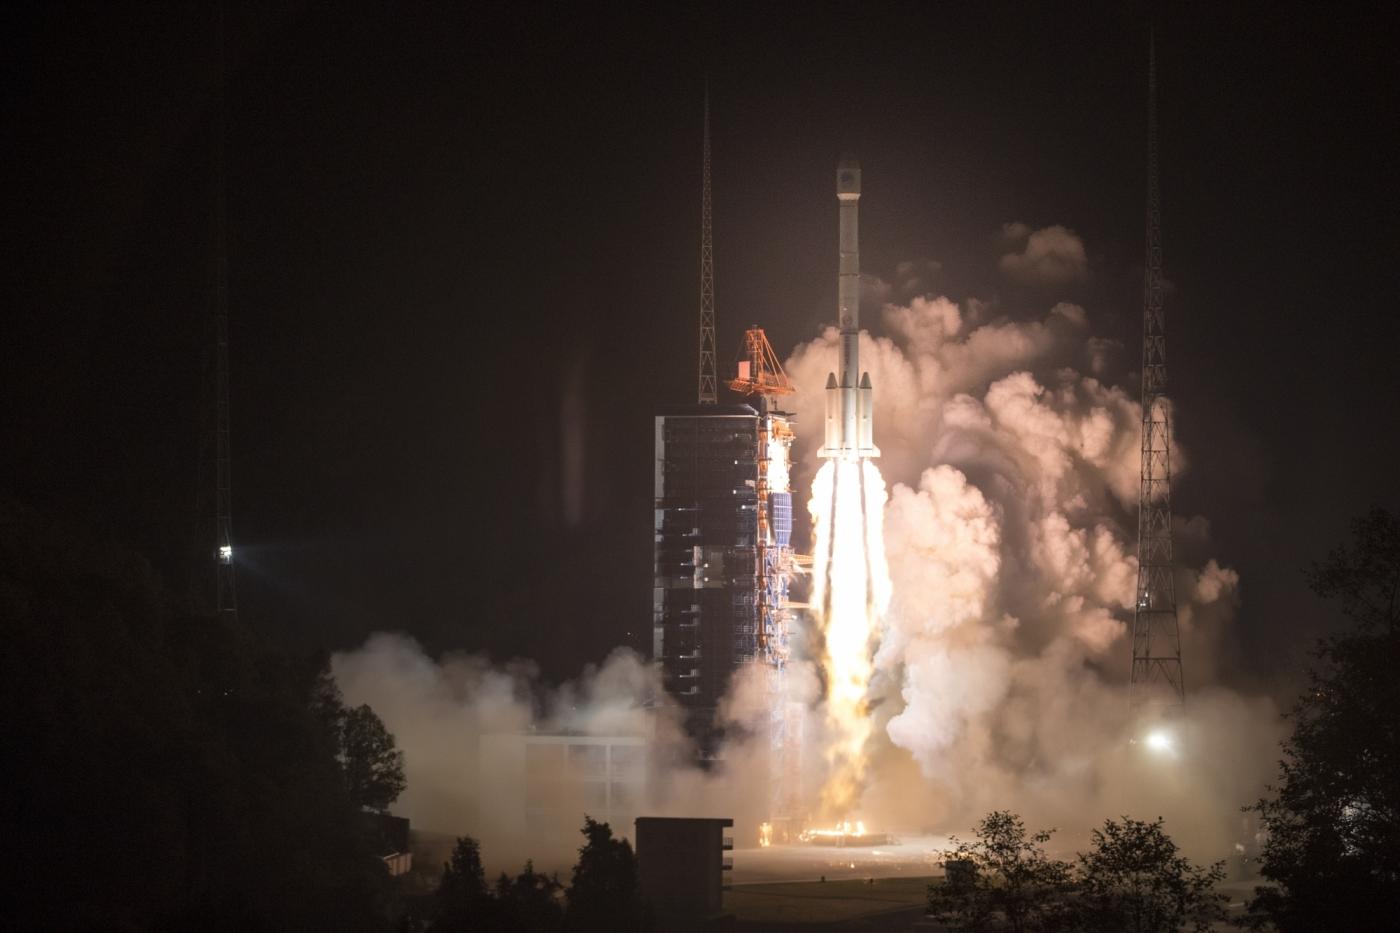 XICHANG, Nov. 19, 2018 (Xinhua) -- China sends two new satellites of the BeiDou Navigation Satellite System (BDS) into space on a Long March-3B carrier rocket from the Xichang Satellite Launch Center in southwest China's Sichuan Province, at 2:07 a.m. on Nov. 19, 2018. (Xinhua/Ju Zhenhua/IANS) by .